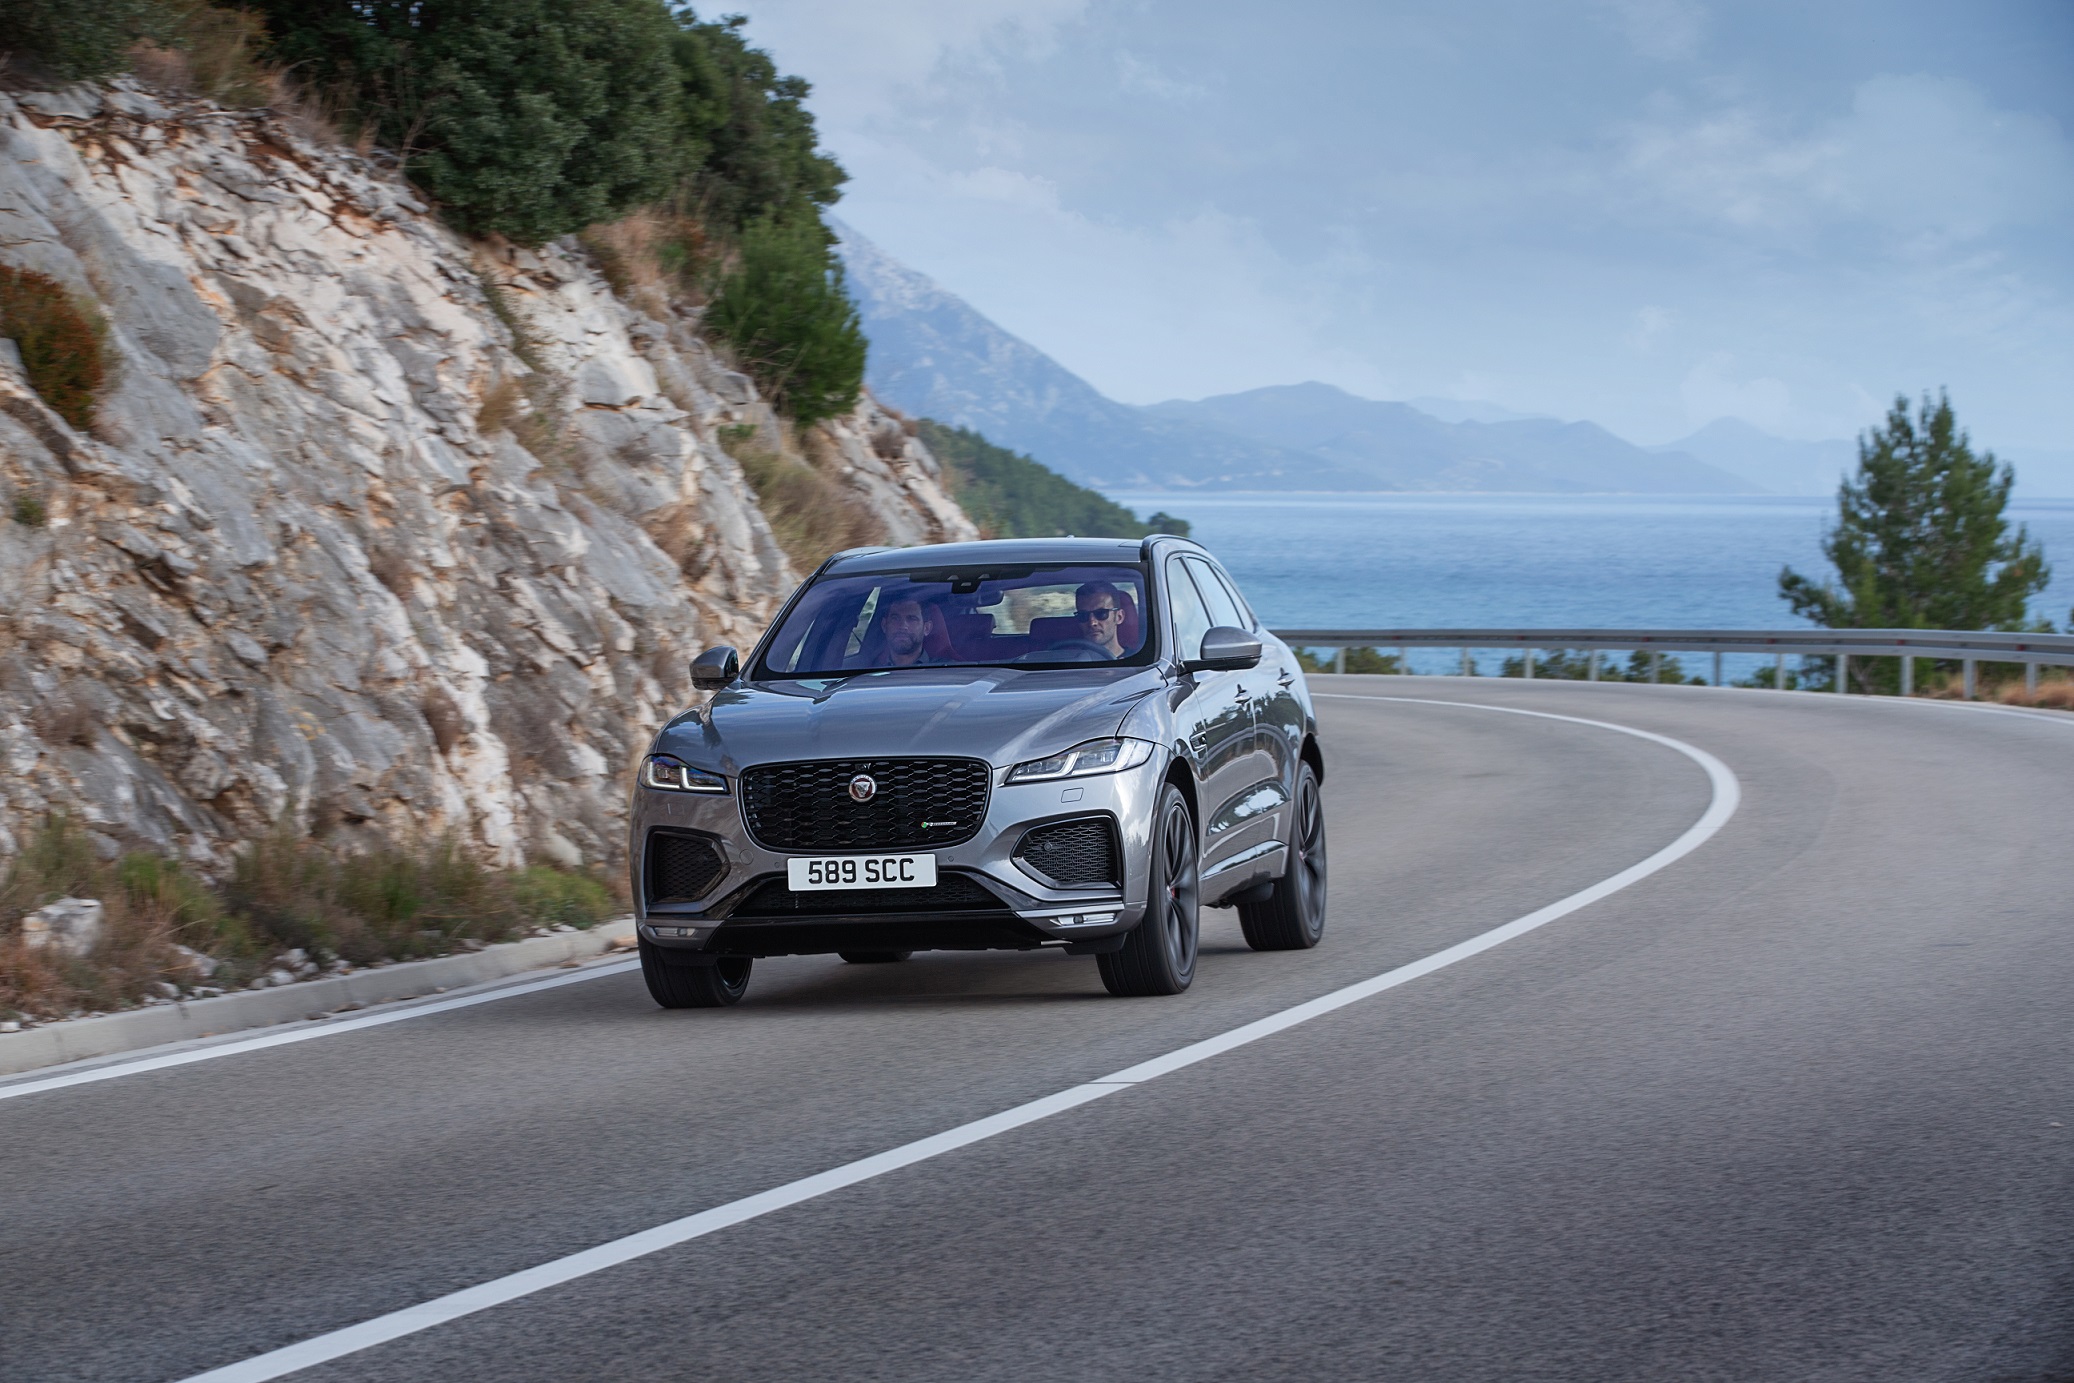 Image for New Jaguar F-Pace: Luxurious, Connected, Electrified